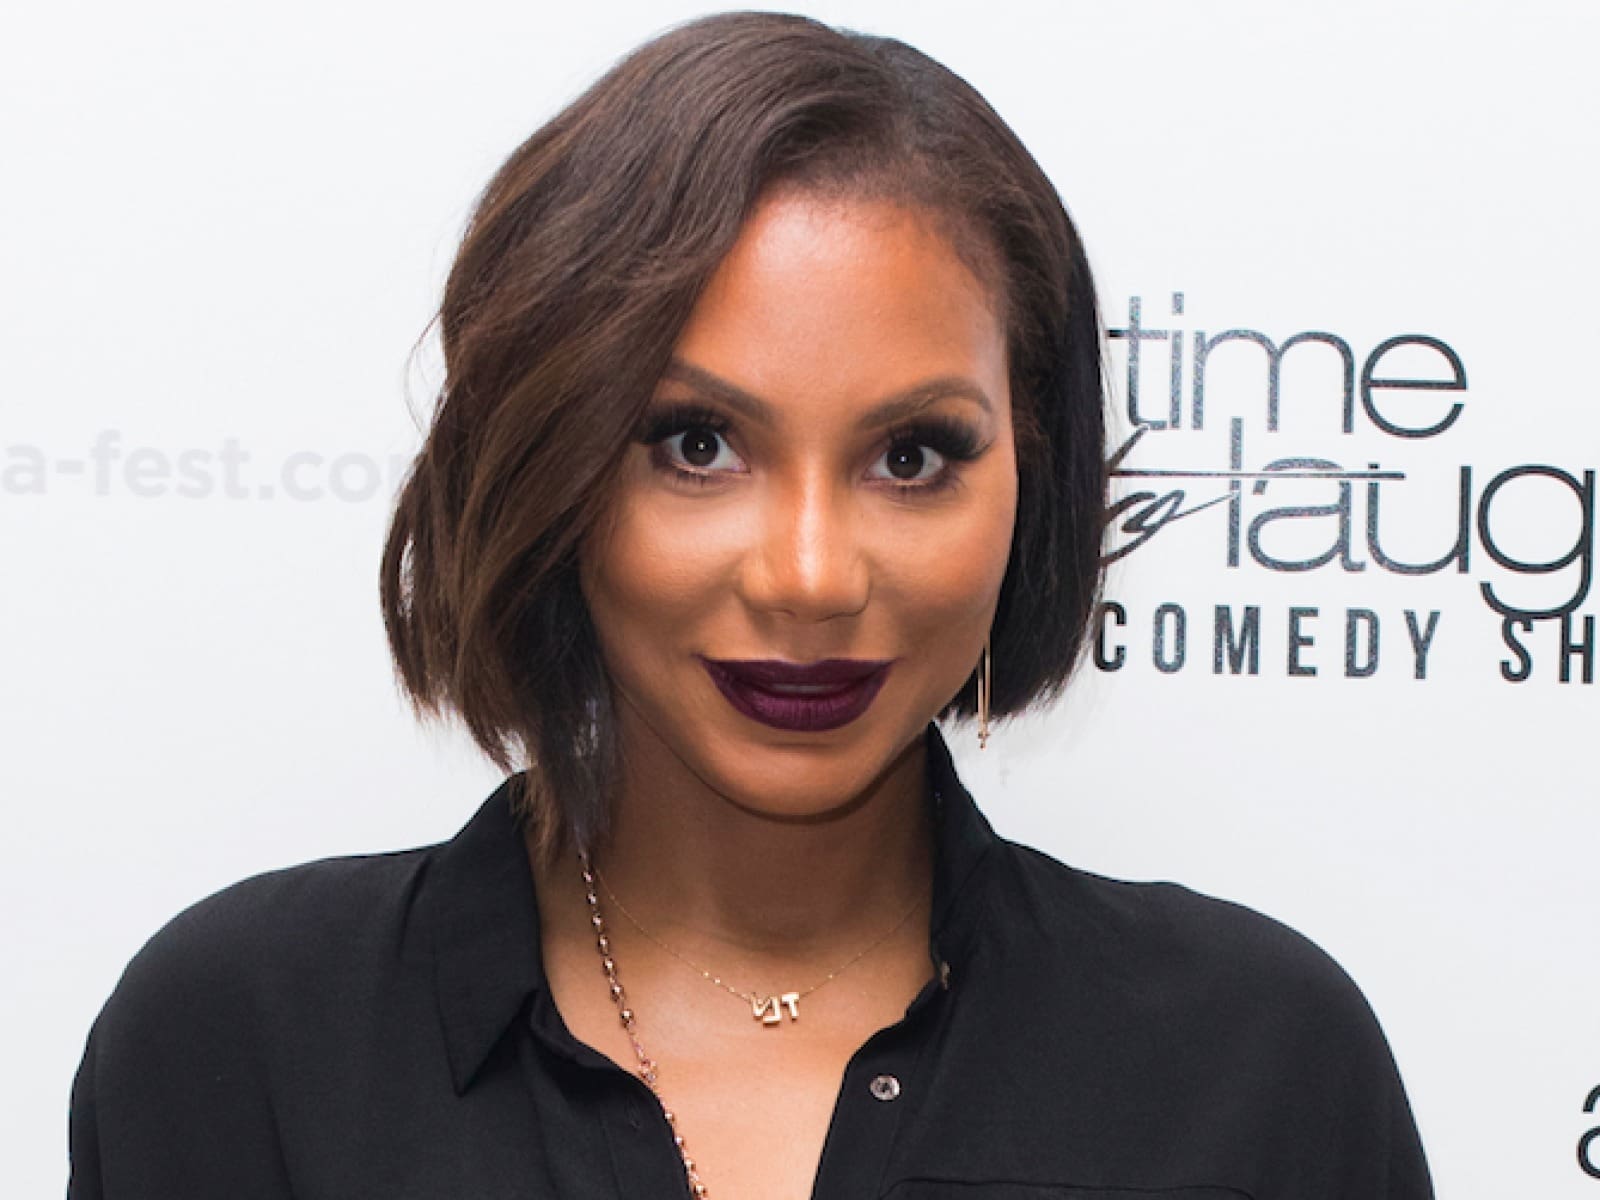 Tamar Braxton Could Not Be Happier Thanks To Her New Show - Check Out Her Emotional Message